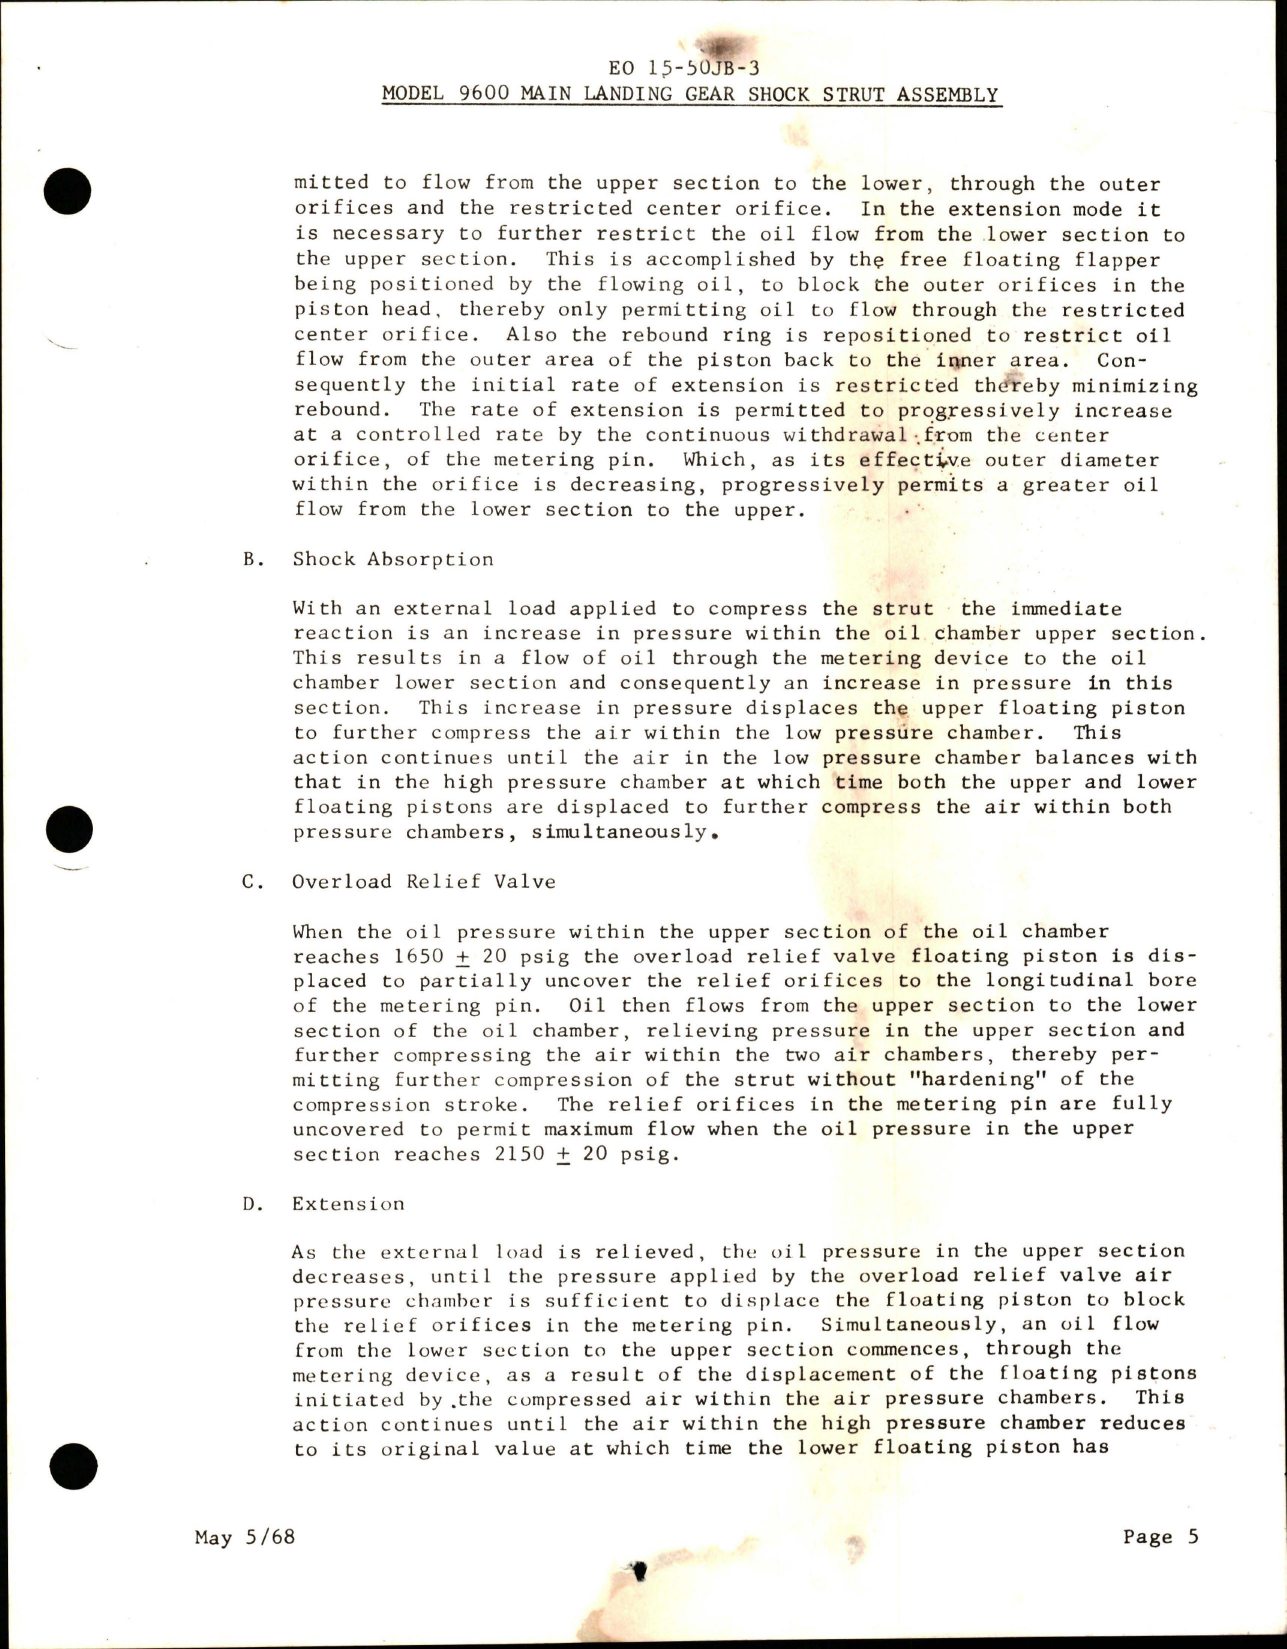 Sample page 9 from AirCorps Library document: Handbook w Part List for Main Landing Gear Shock Strut Assembly - Part 9600-7